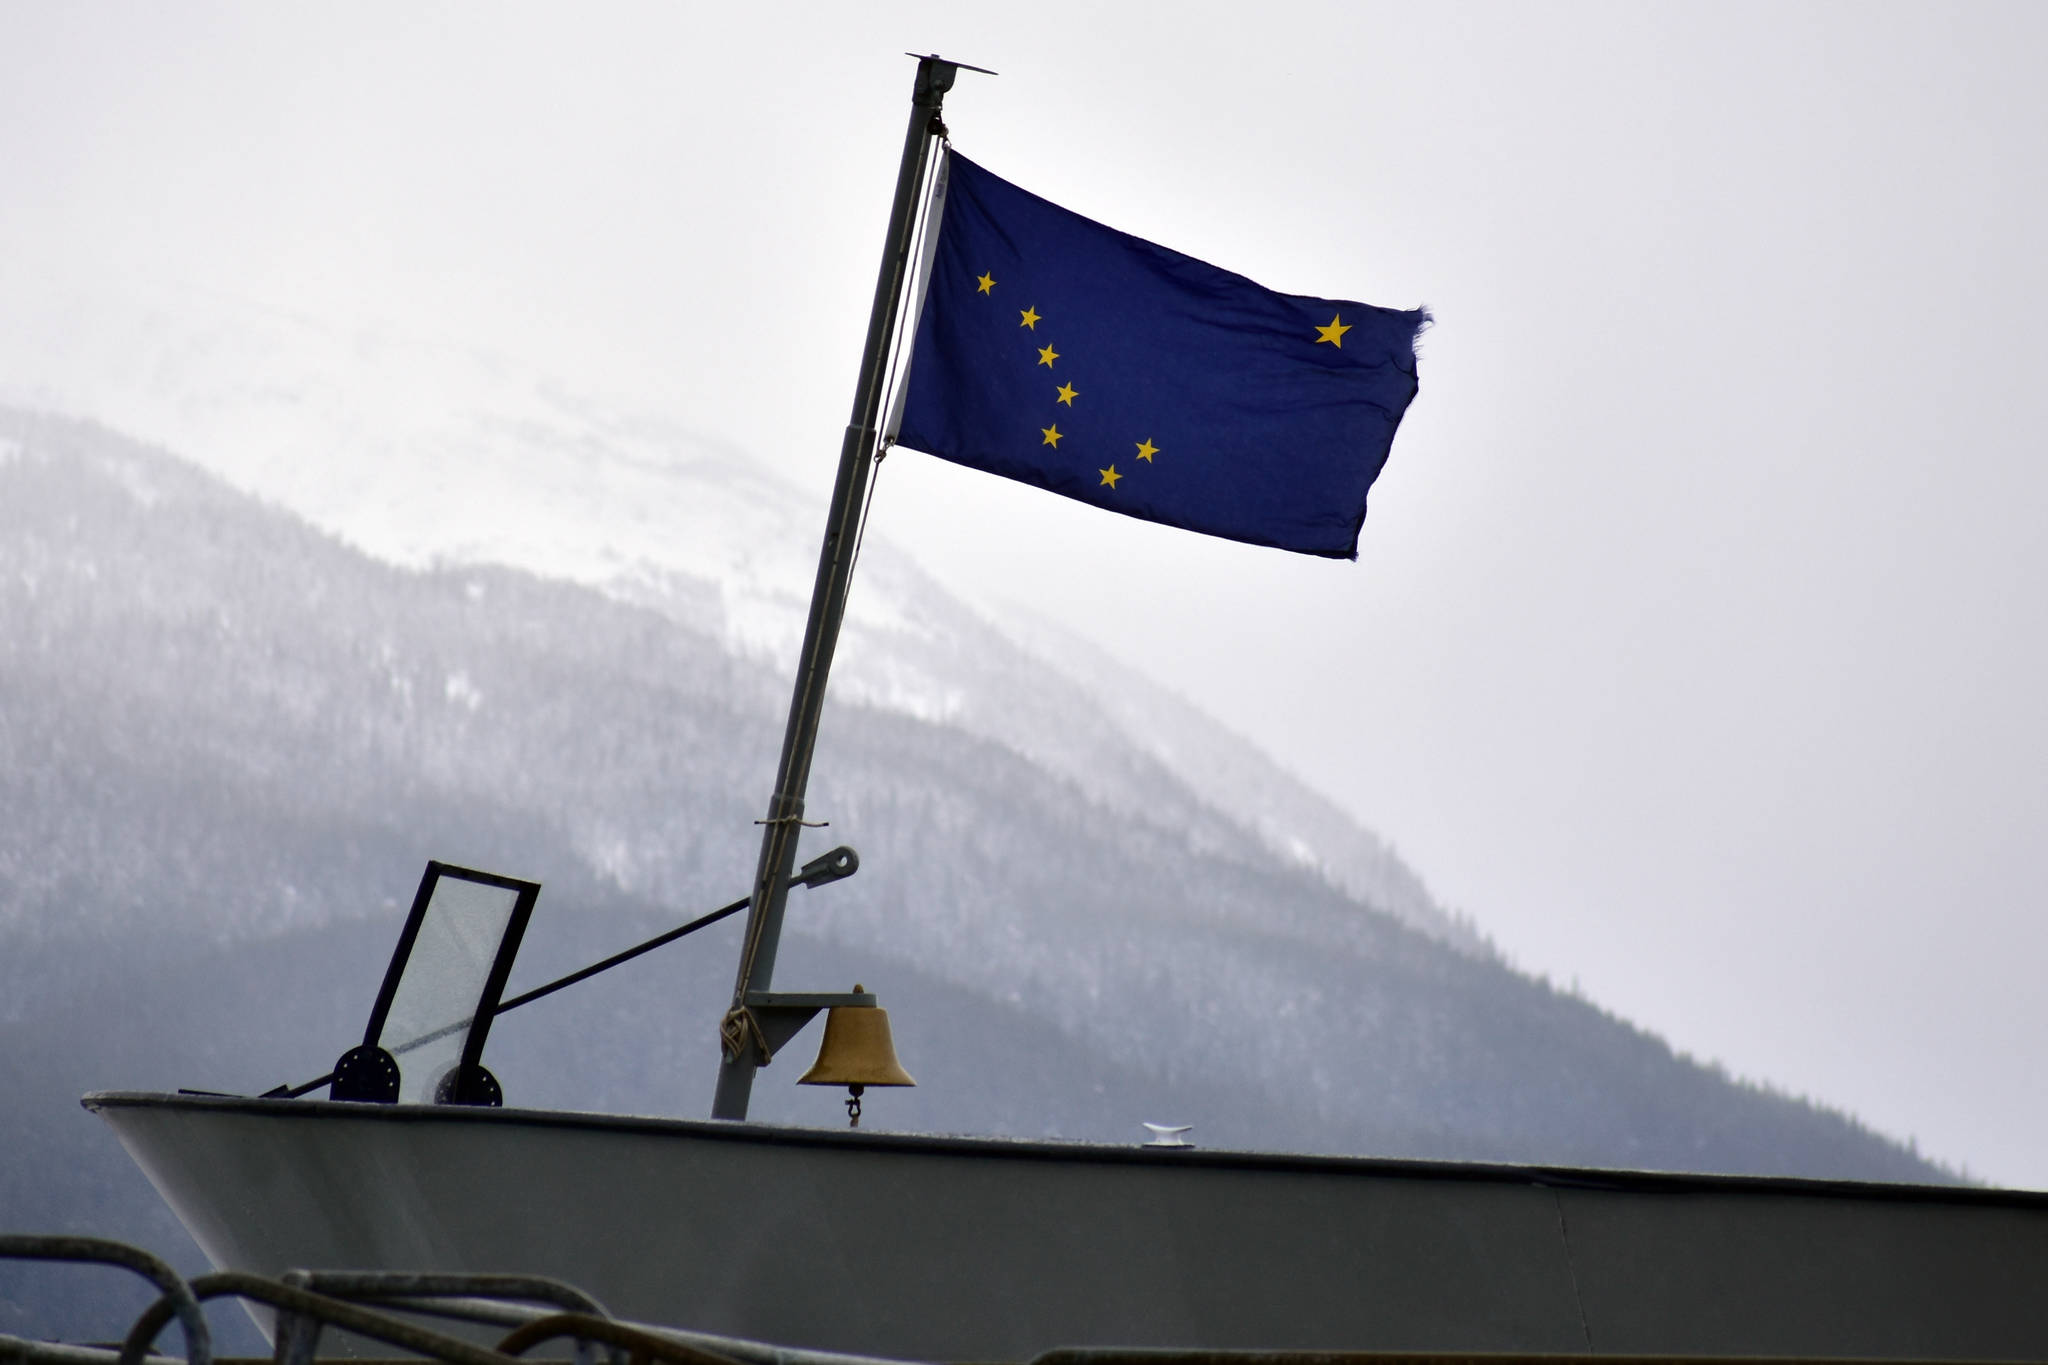 Peter Segall | Juneau Empire                                 The Alaska state flag flies on the bow of the MV Matanuska at the Auke Bay Ferry Terminal on Feb. 6.